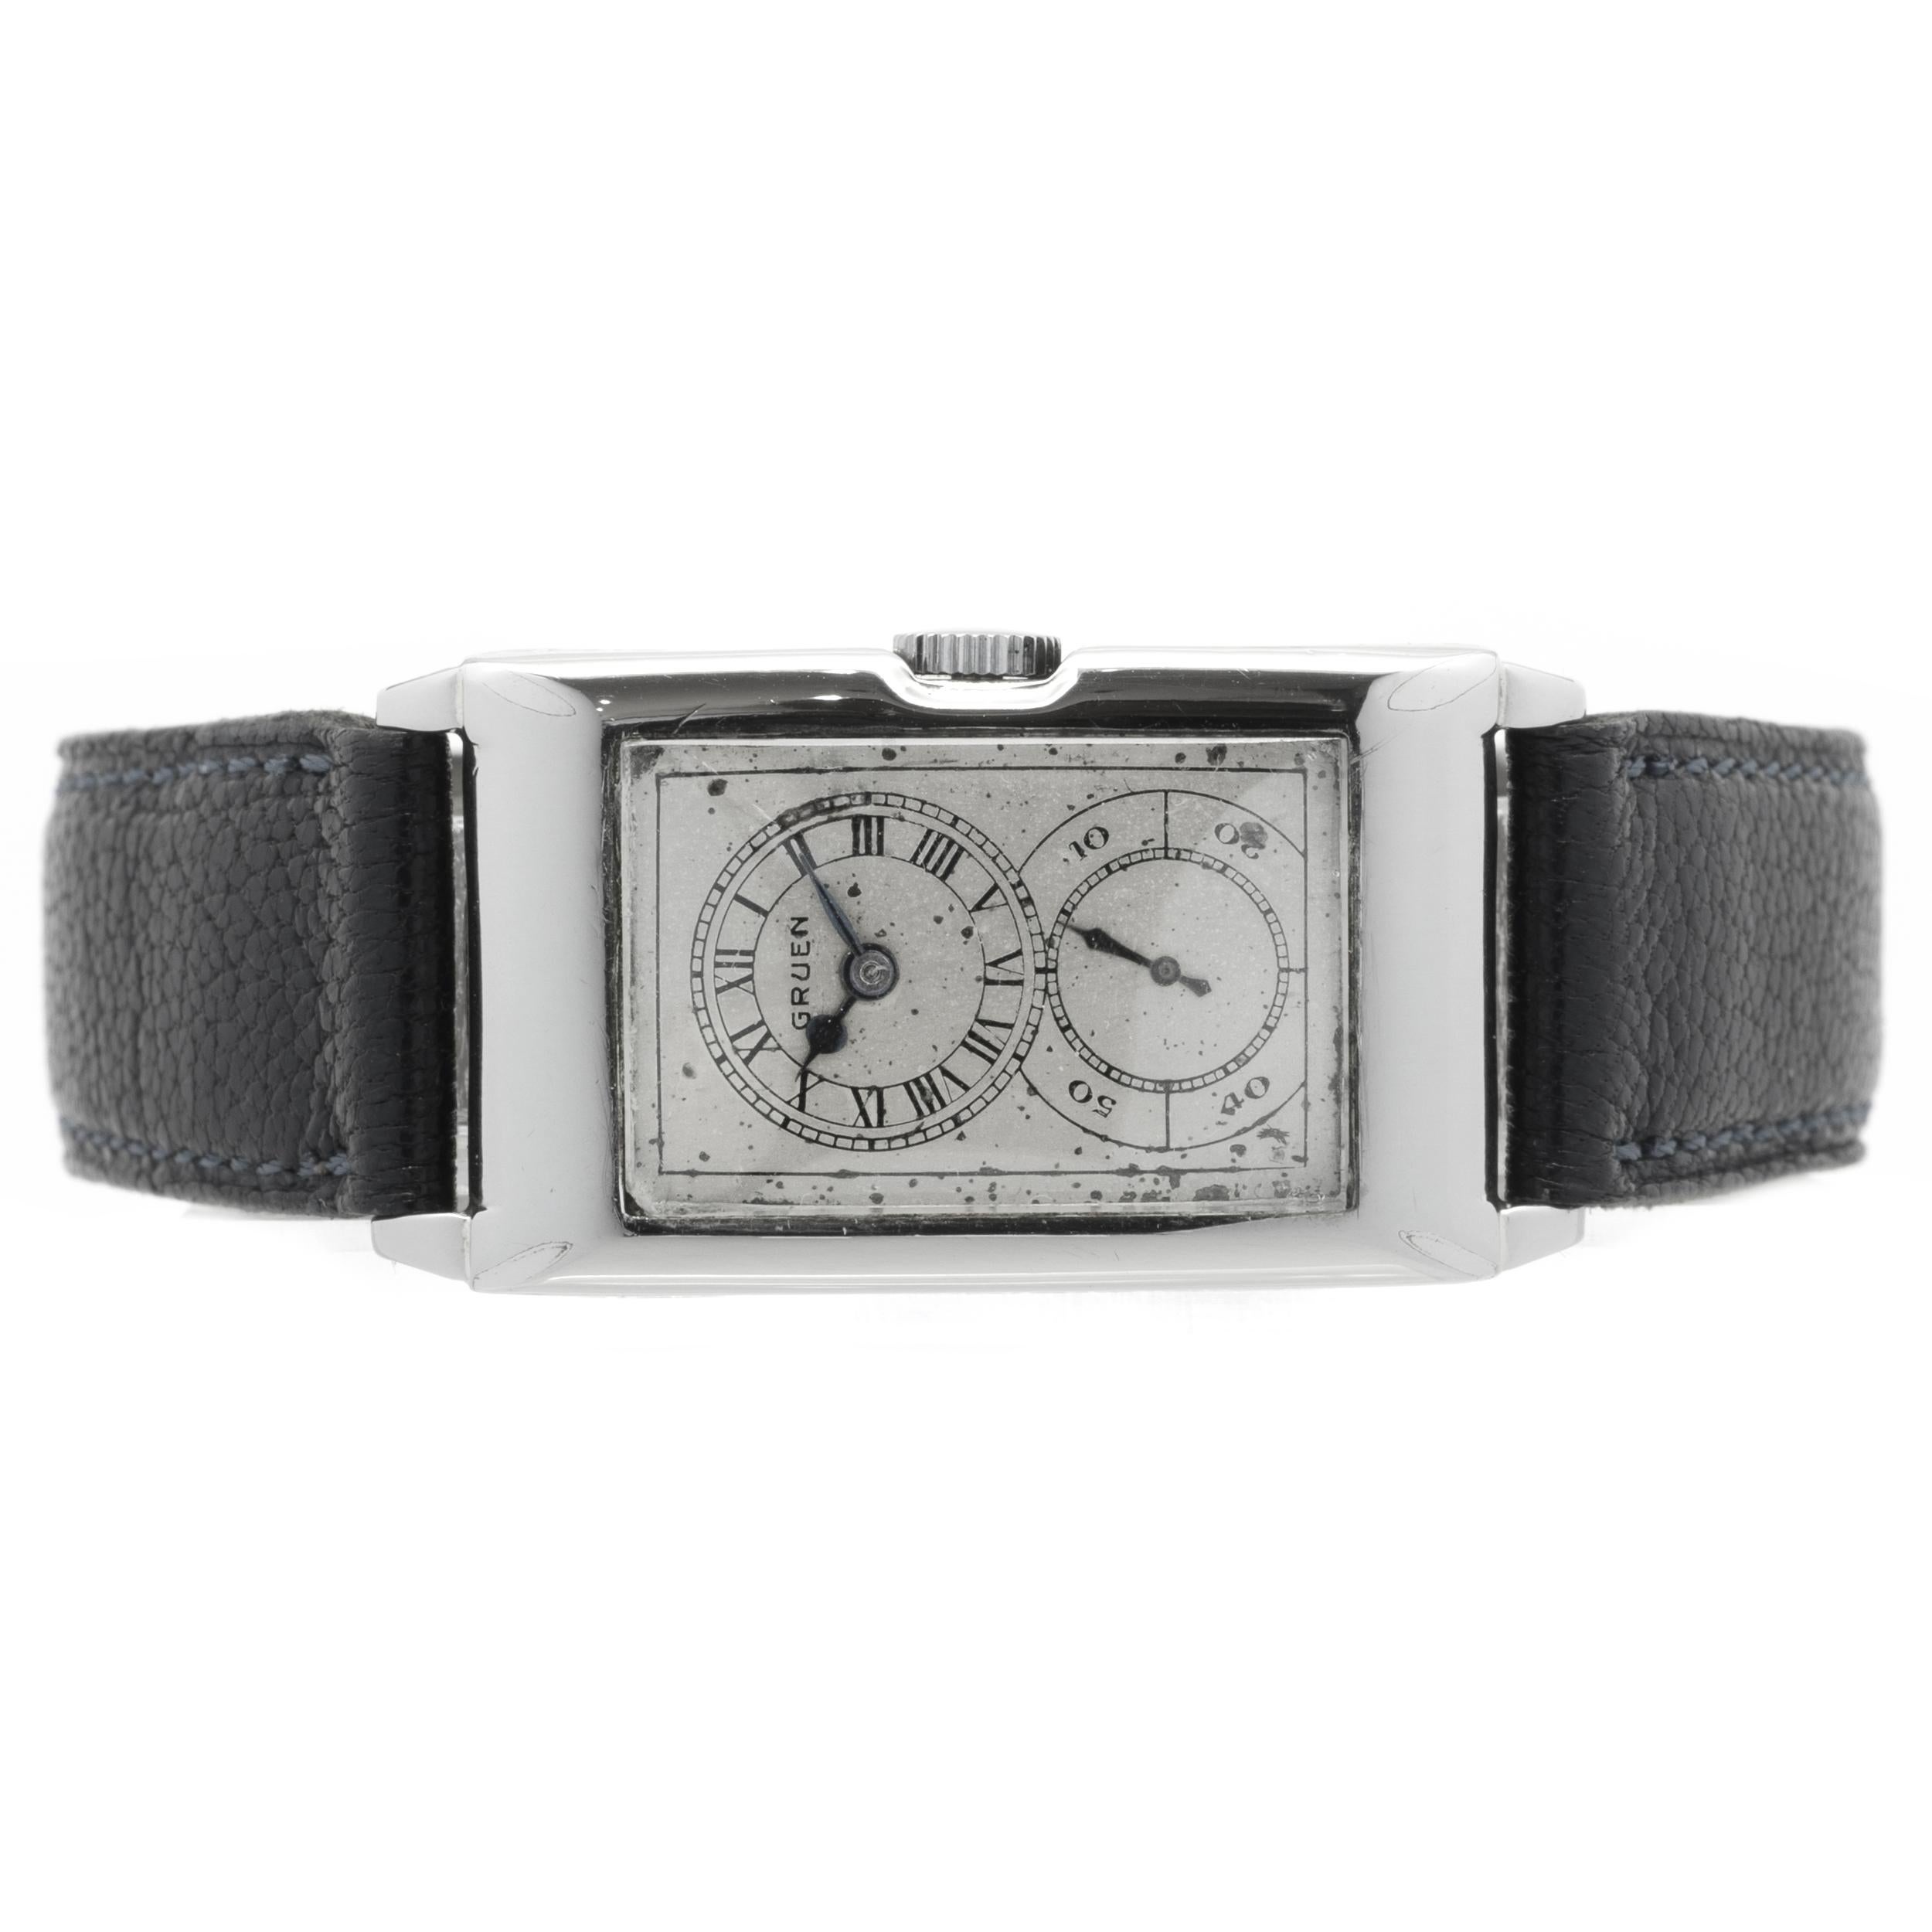 Movement: manual wind
Function: hours, minutes, seconds
Case: Rectangle 35 X 21mm 14K white gold filled case, winding crown on the side of the case, plastic crystal
Dial: silver roman dial with blue hands
Band: Navy Cartier strap with buckle

No box